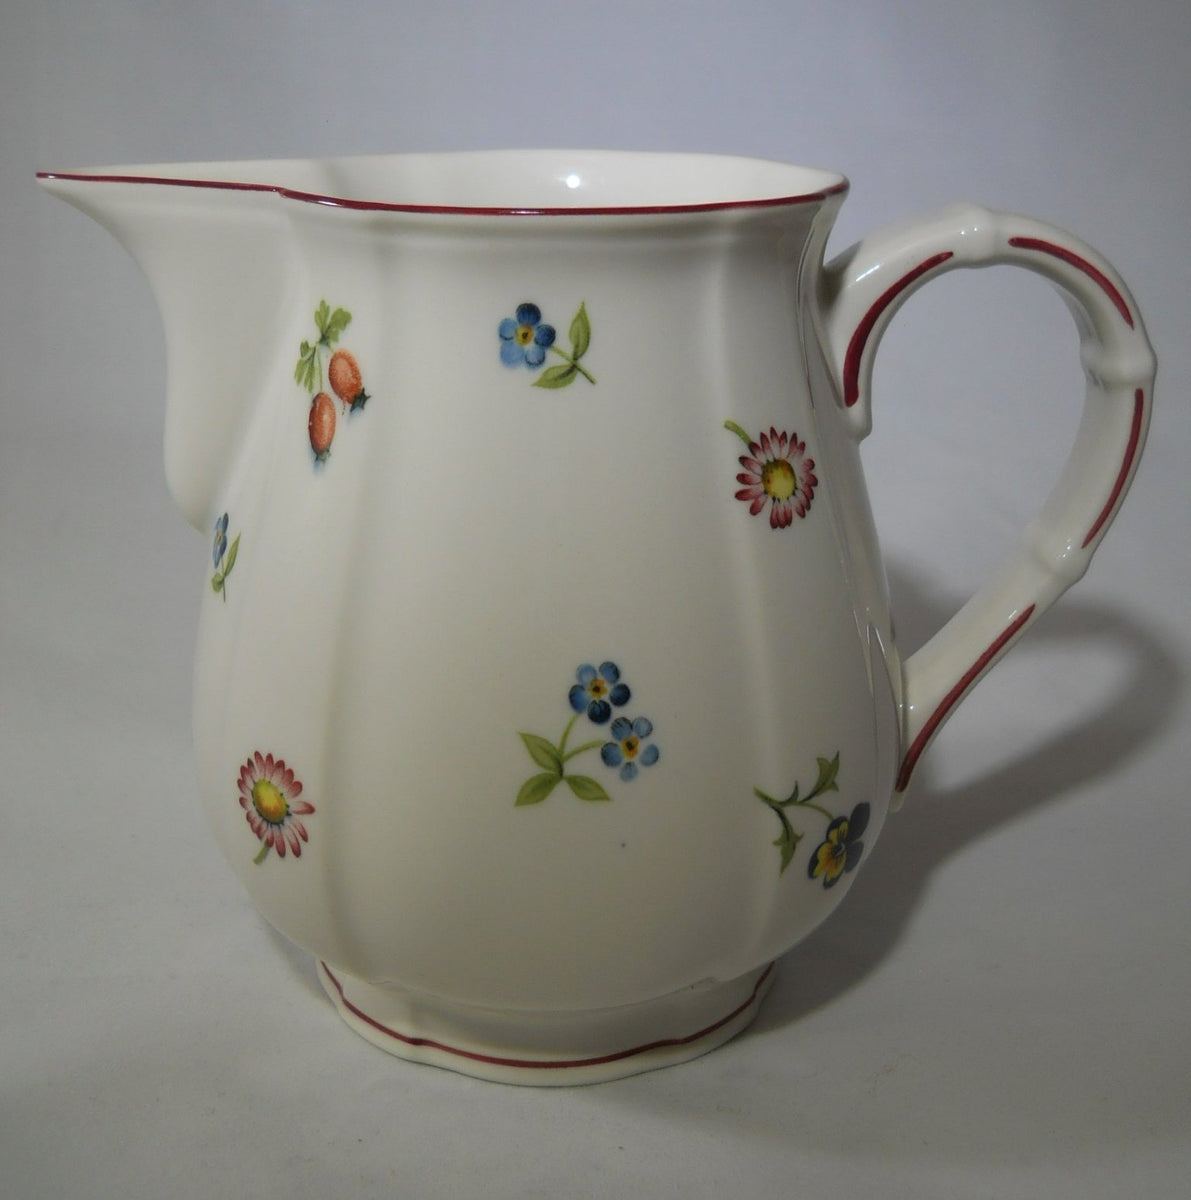 Villeroy and Boch Petite Fleur Country Collection 84 Oz. Pitcher